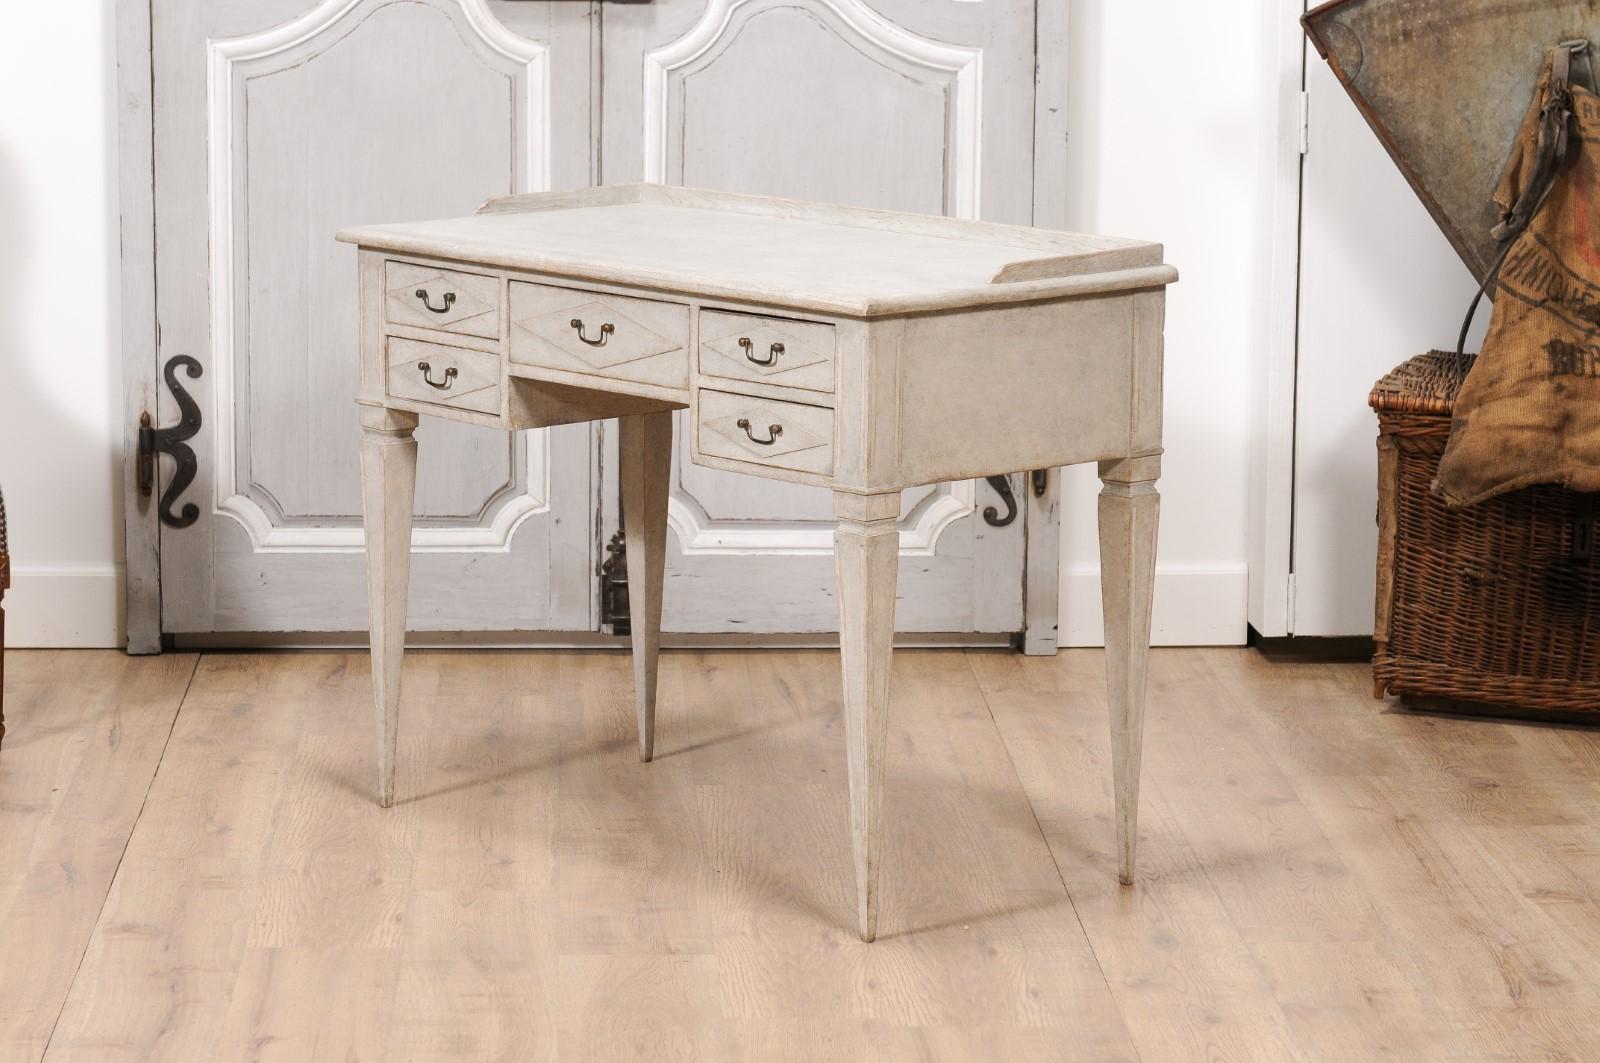 1880s Swedish Gustavian Style Painted Desk with Five Drawers and Tapered Legs For Sale 5